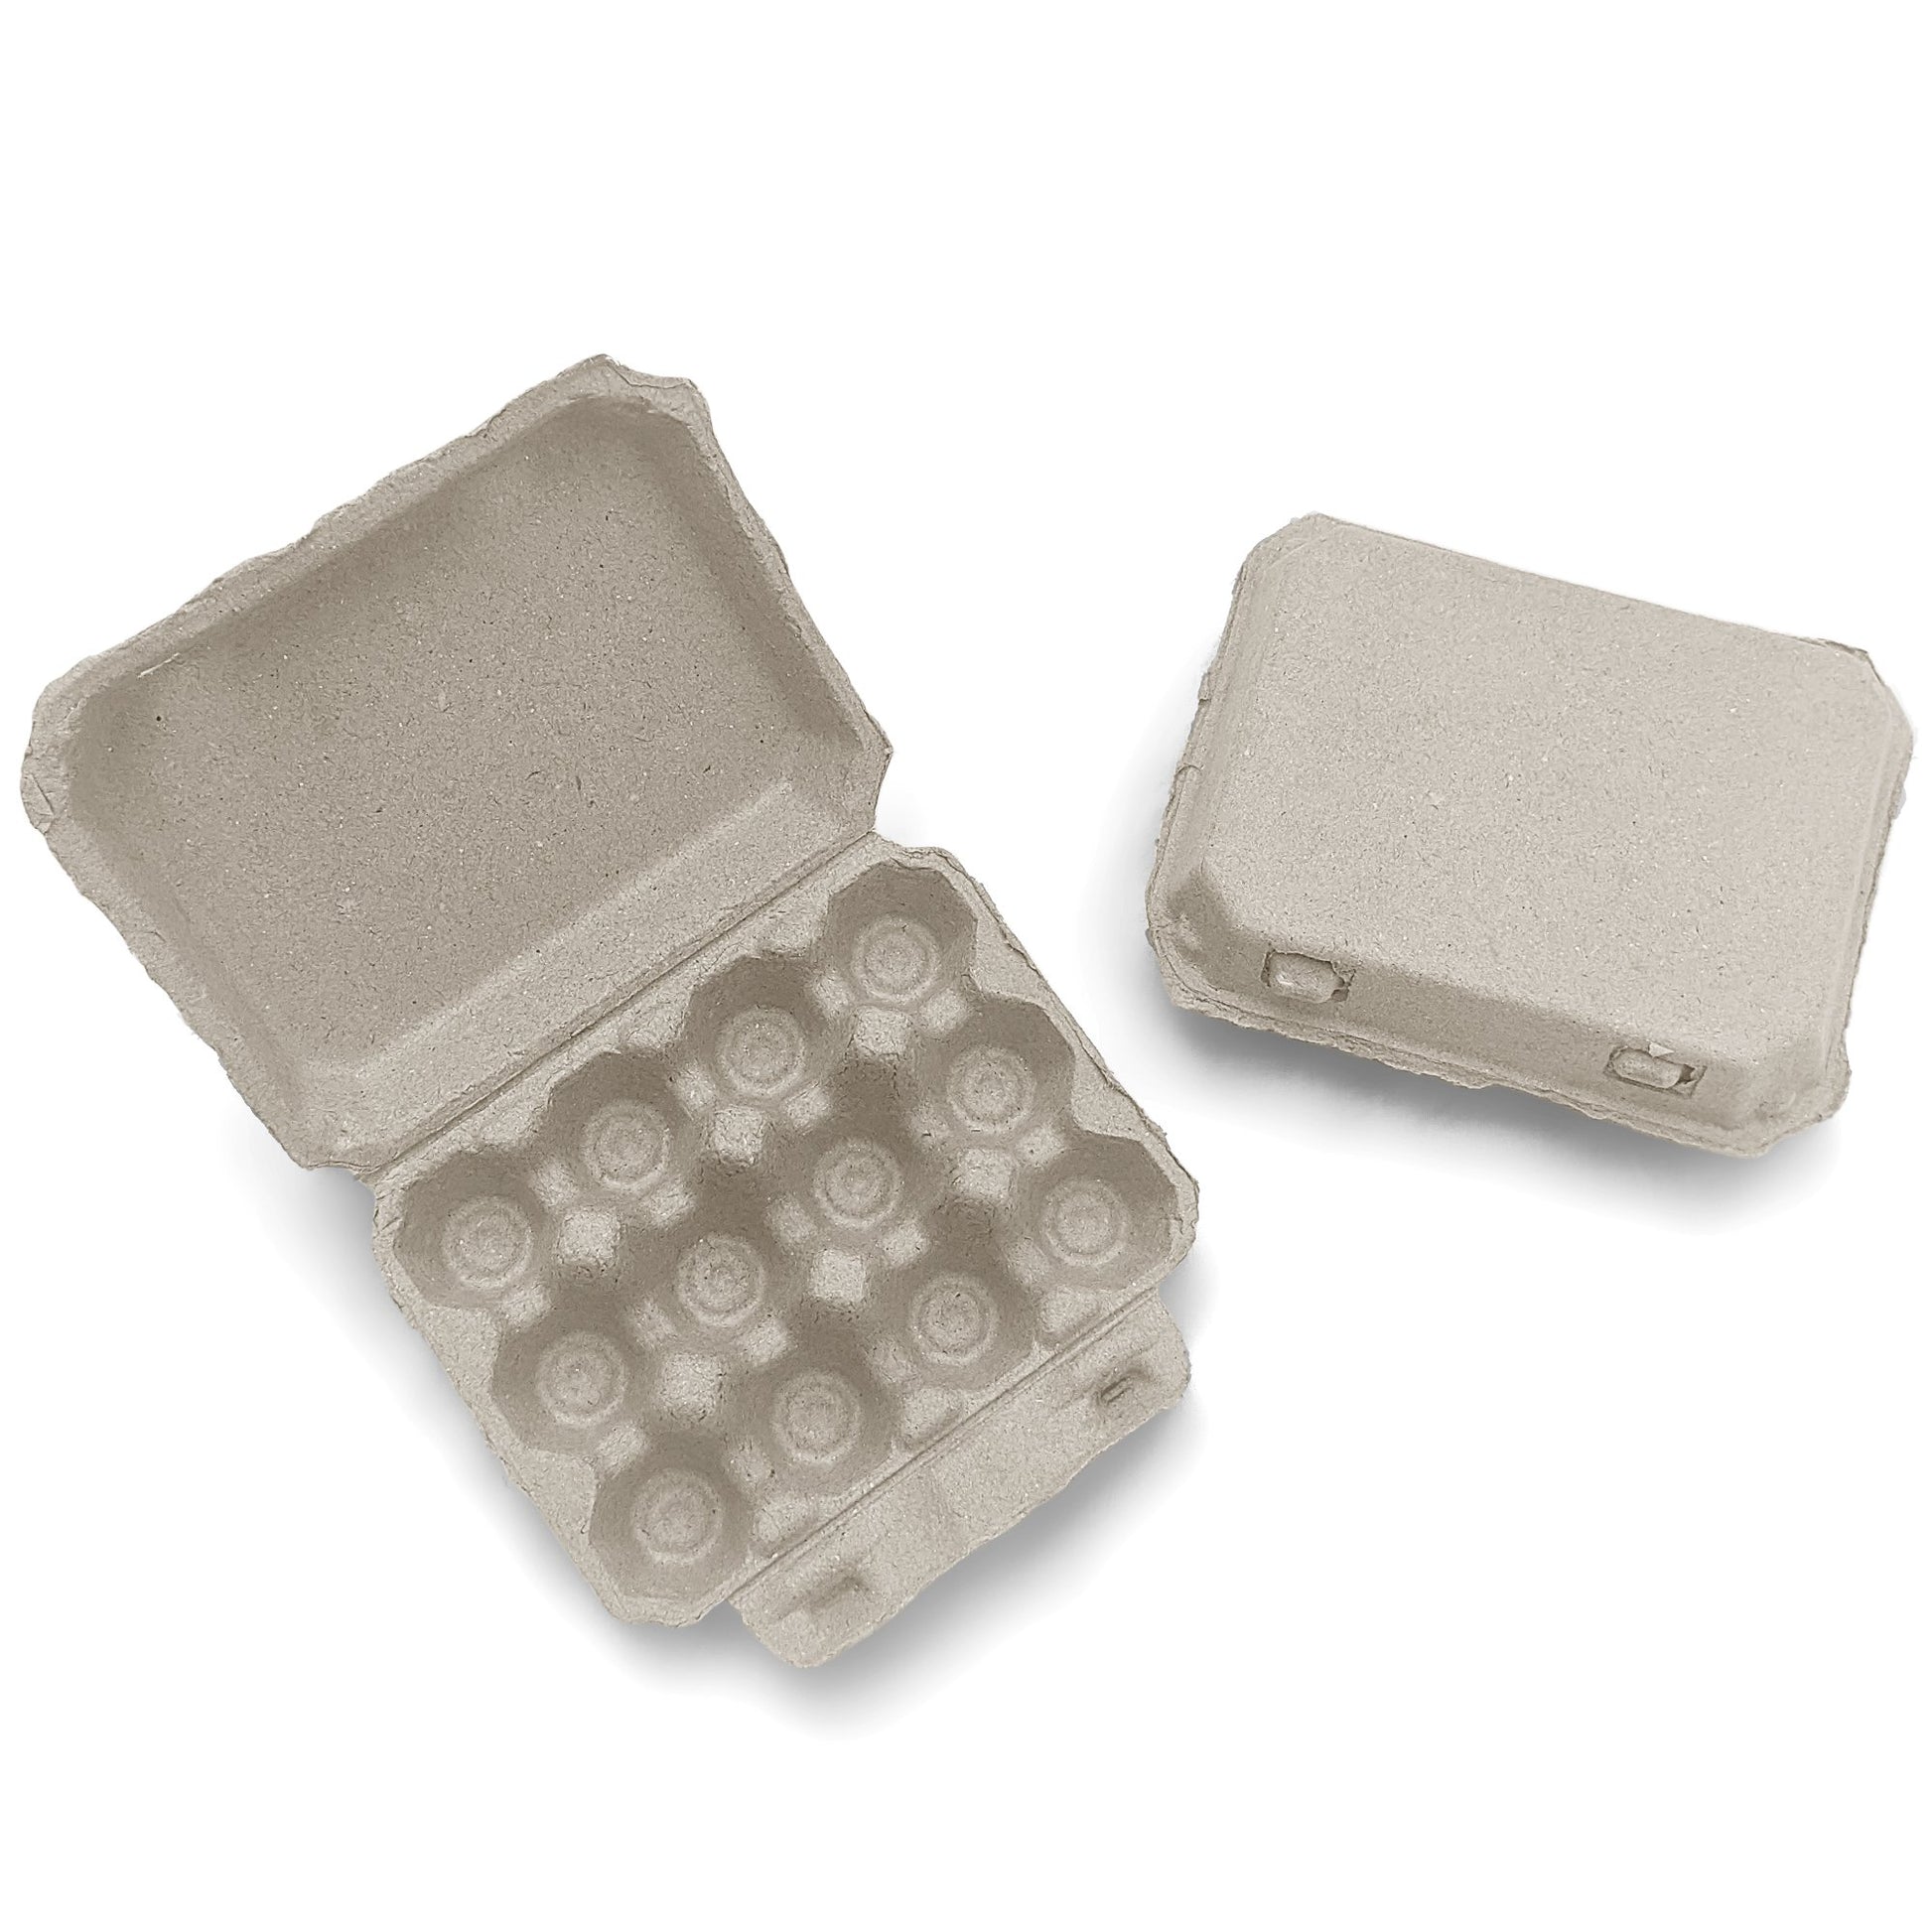 The tiny size makes these egg cartons perfect for making adorable craft projects, seed starter trays, and packaging for gifts or candy.